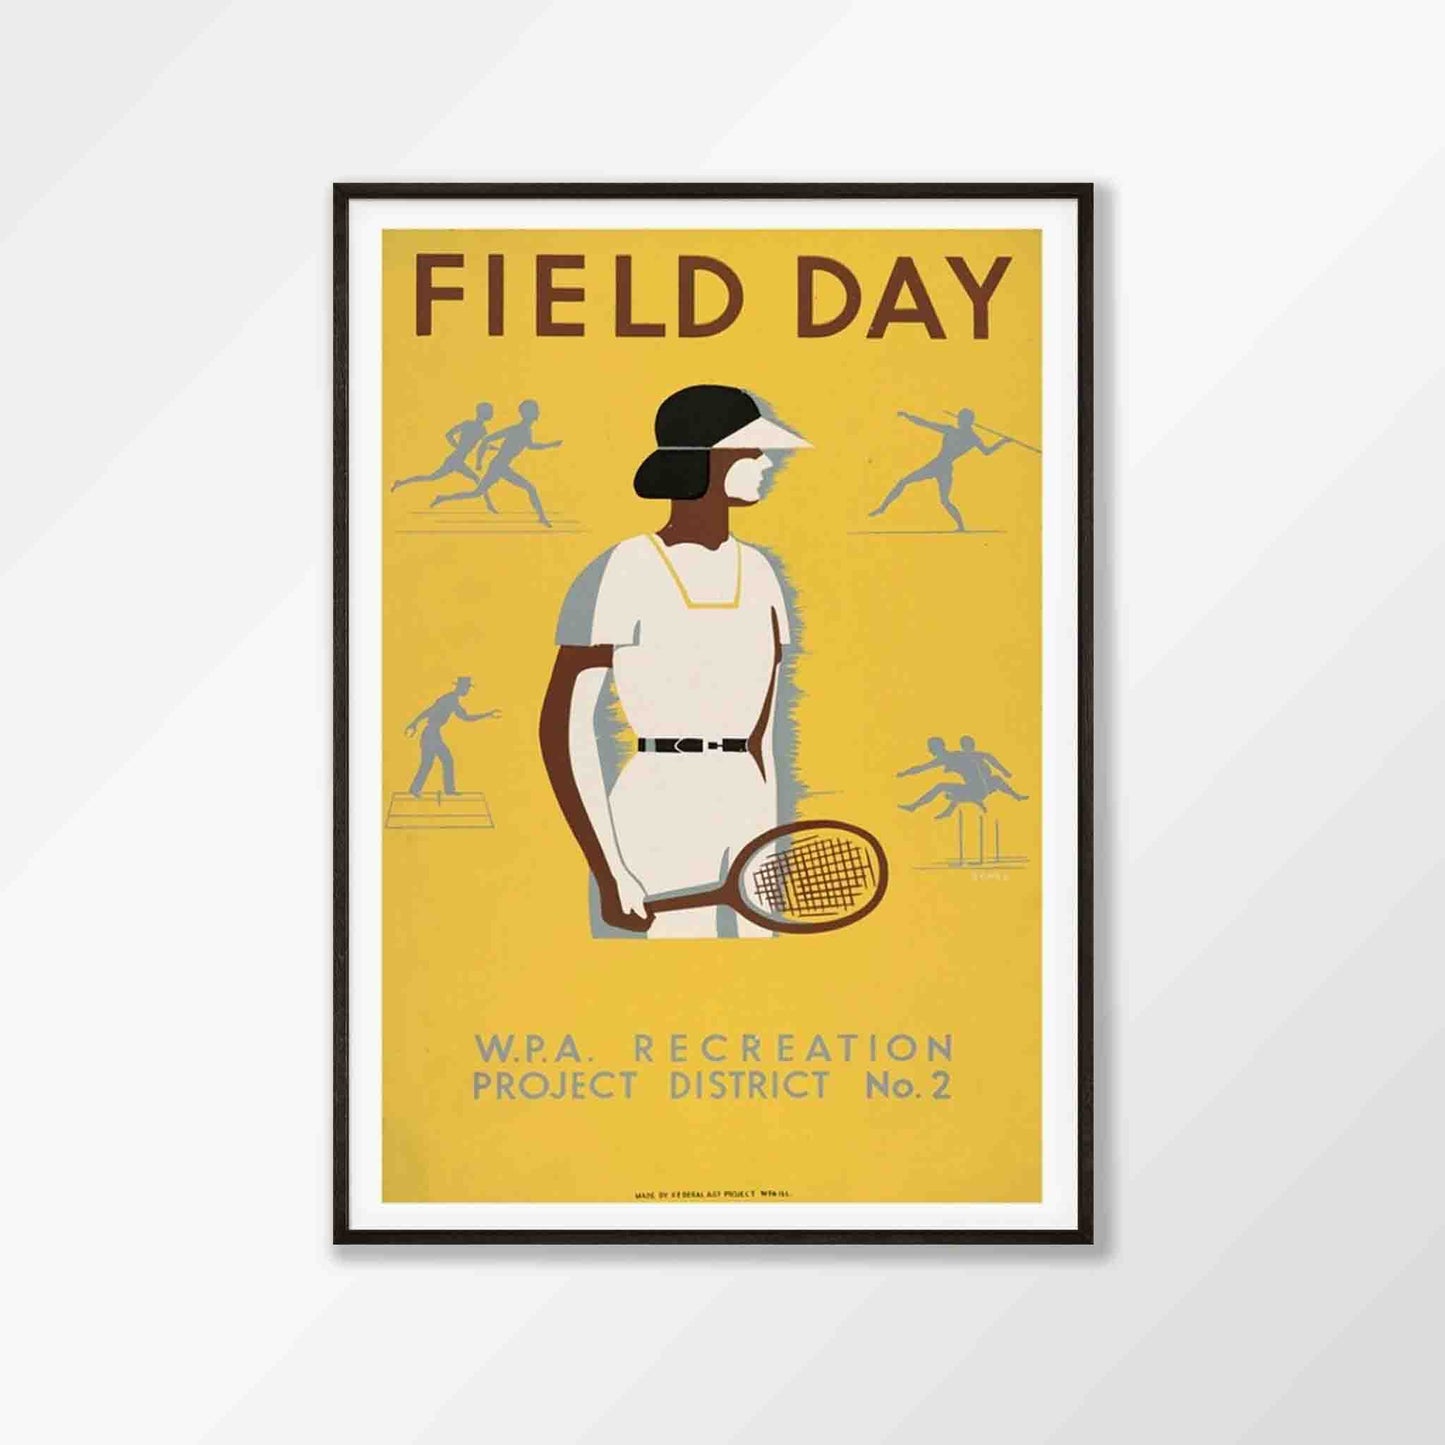 Field Day Vintage Tennis Poster